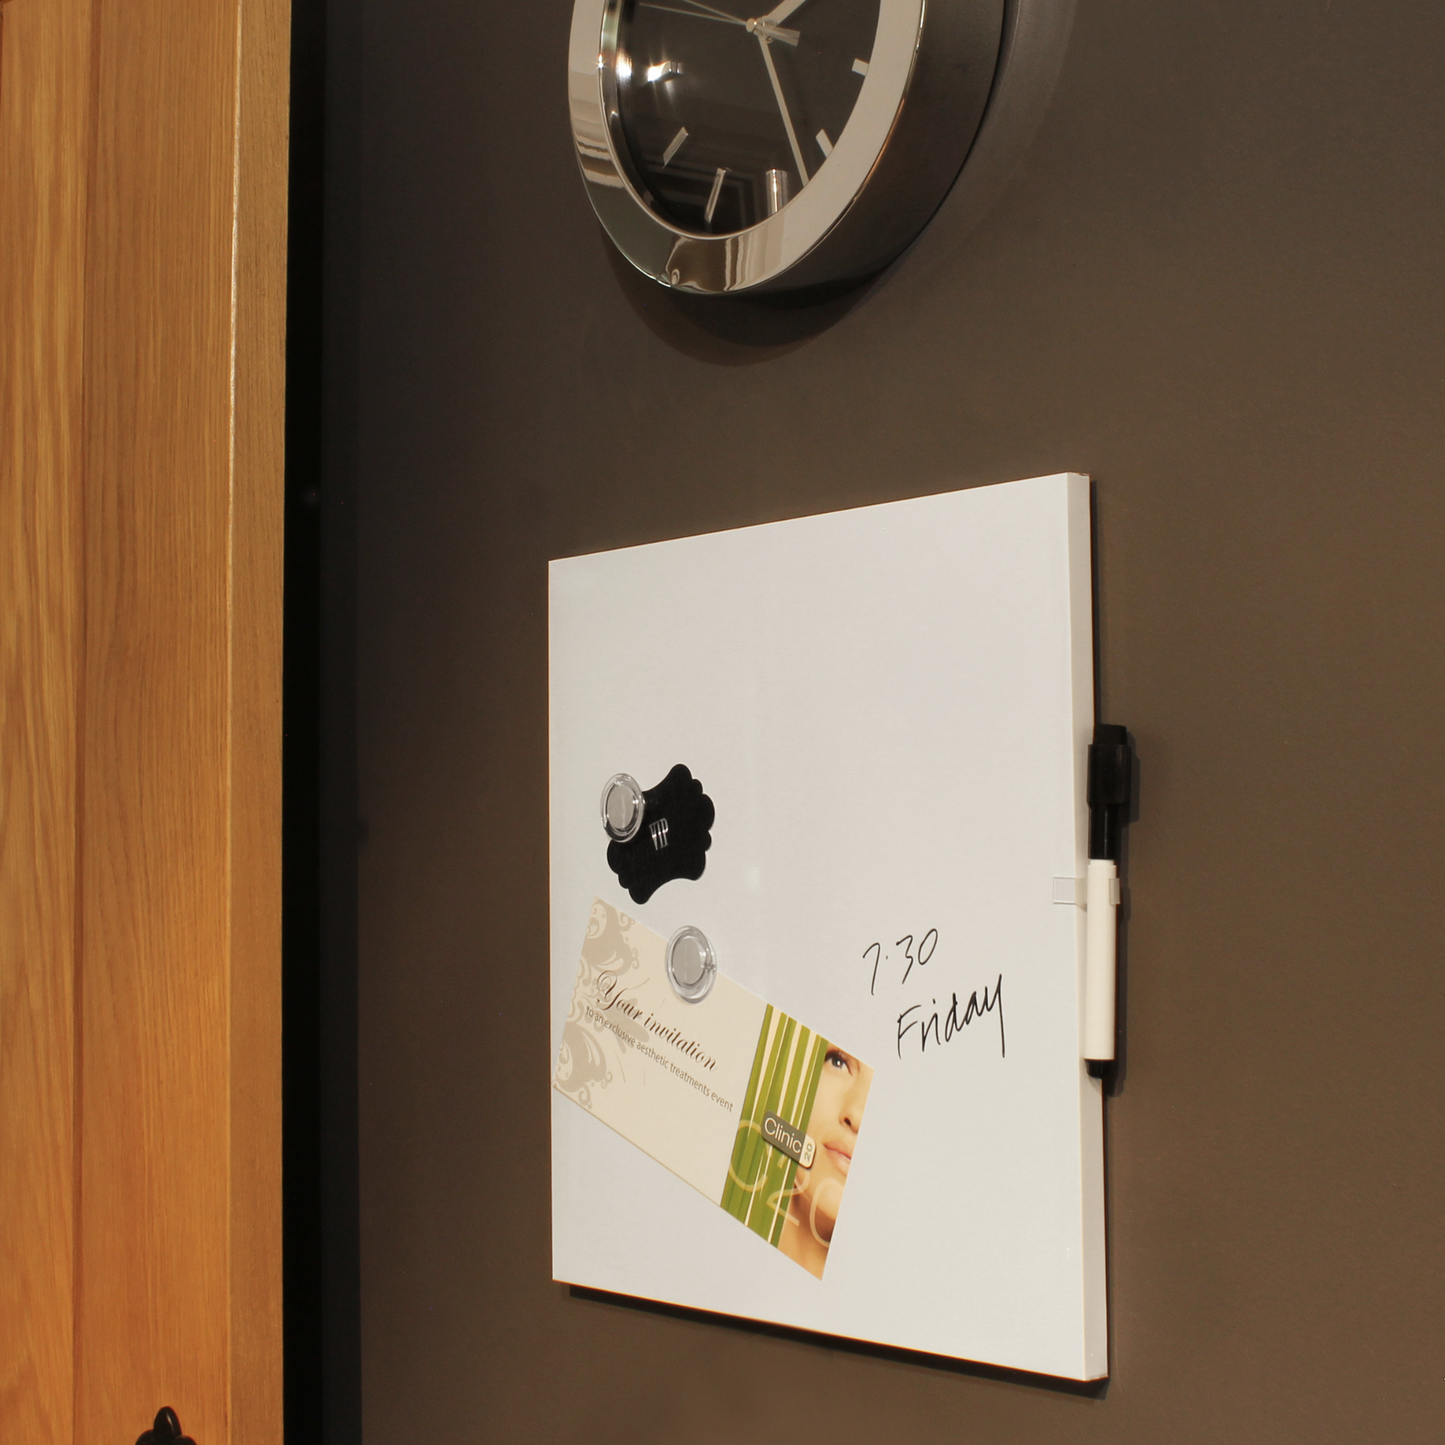 A frameless dry-erase board mounted on a wall with a marker attached, showcasing its use in a modern setting. The board has a wedding invitation and a salon flyer held by magnets, and a handwritten note that reads '7:30 Friday', indicating its role in keeping track of appointments and events.